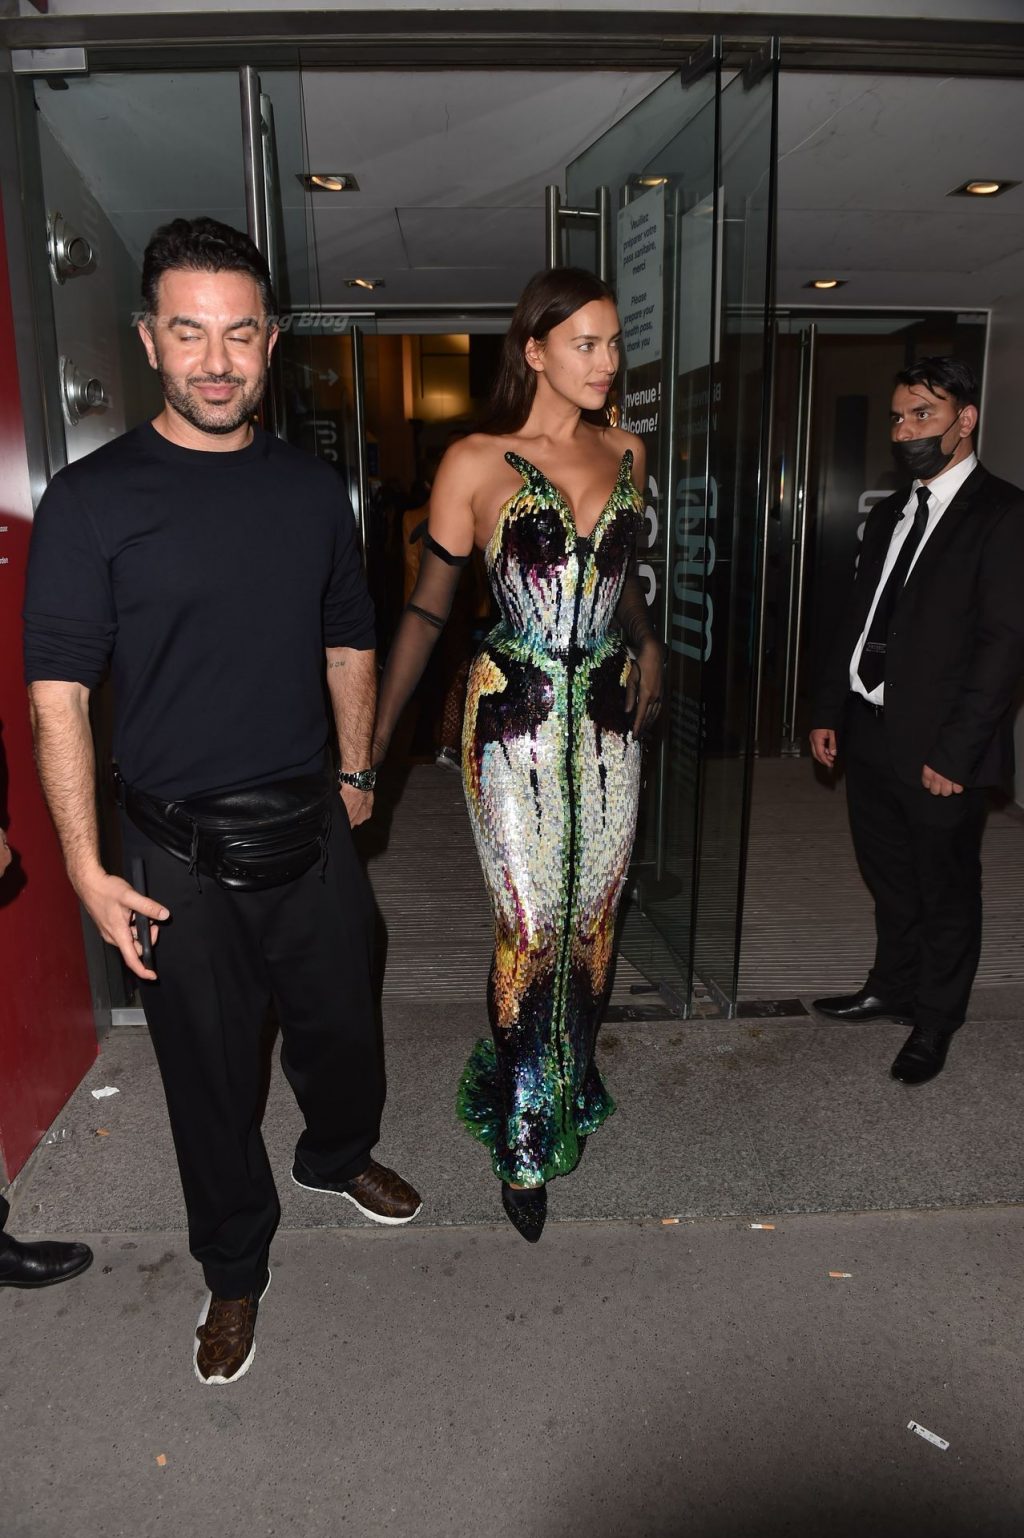 Irina Shayk Shows Off Her Cleavage As She attend the “Thierry Mugler: Couturissime” Photocall in Paris (35 Photos)